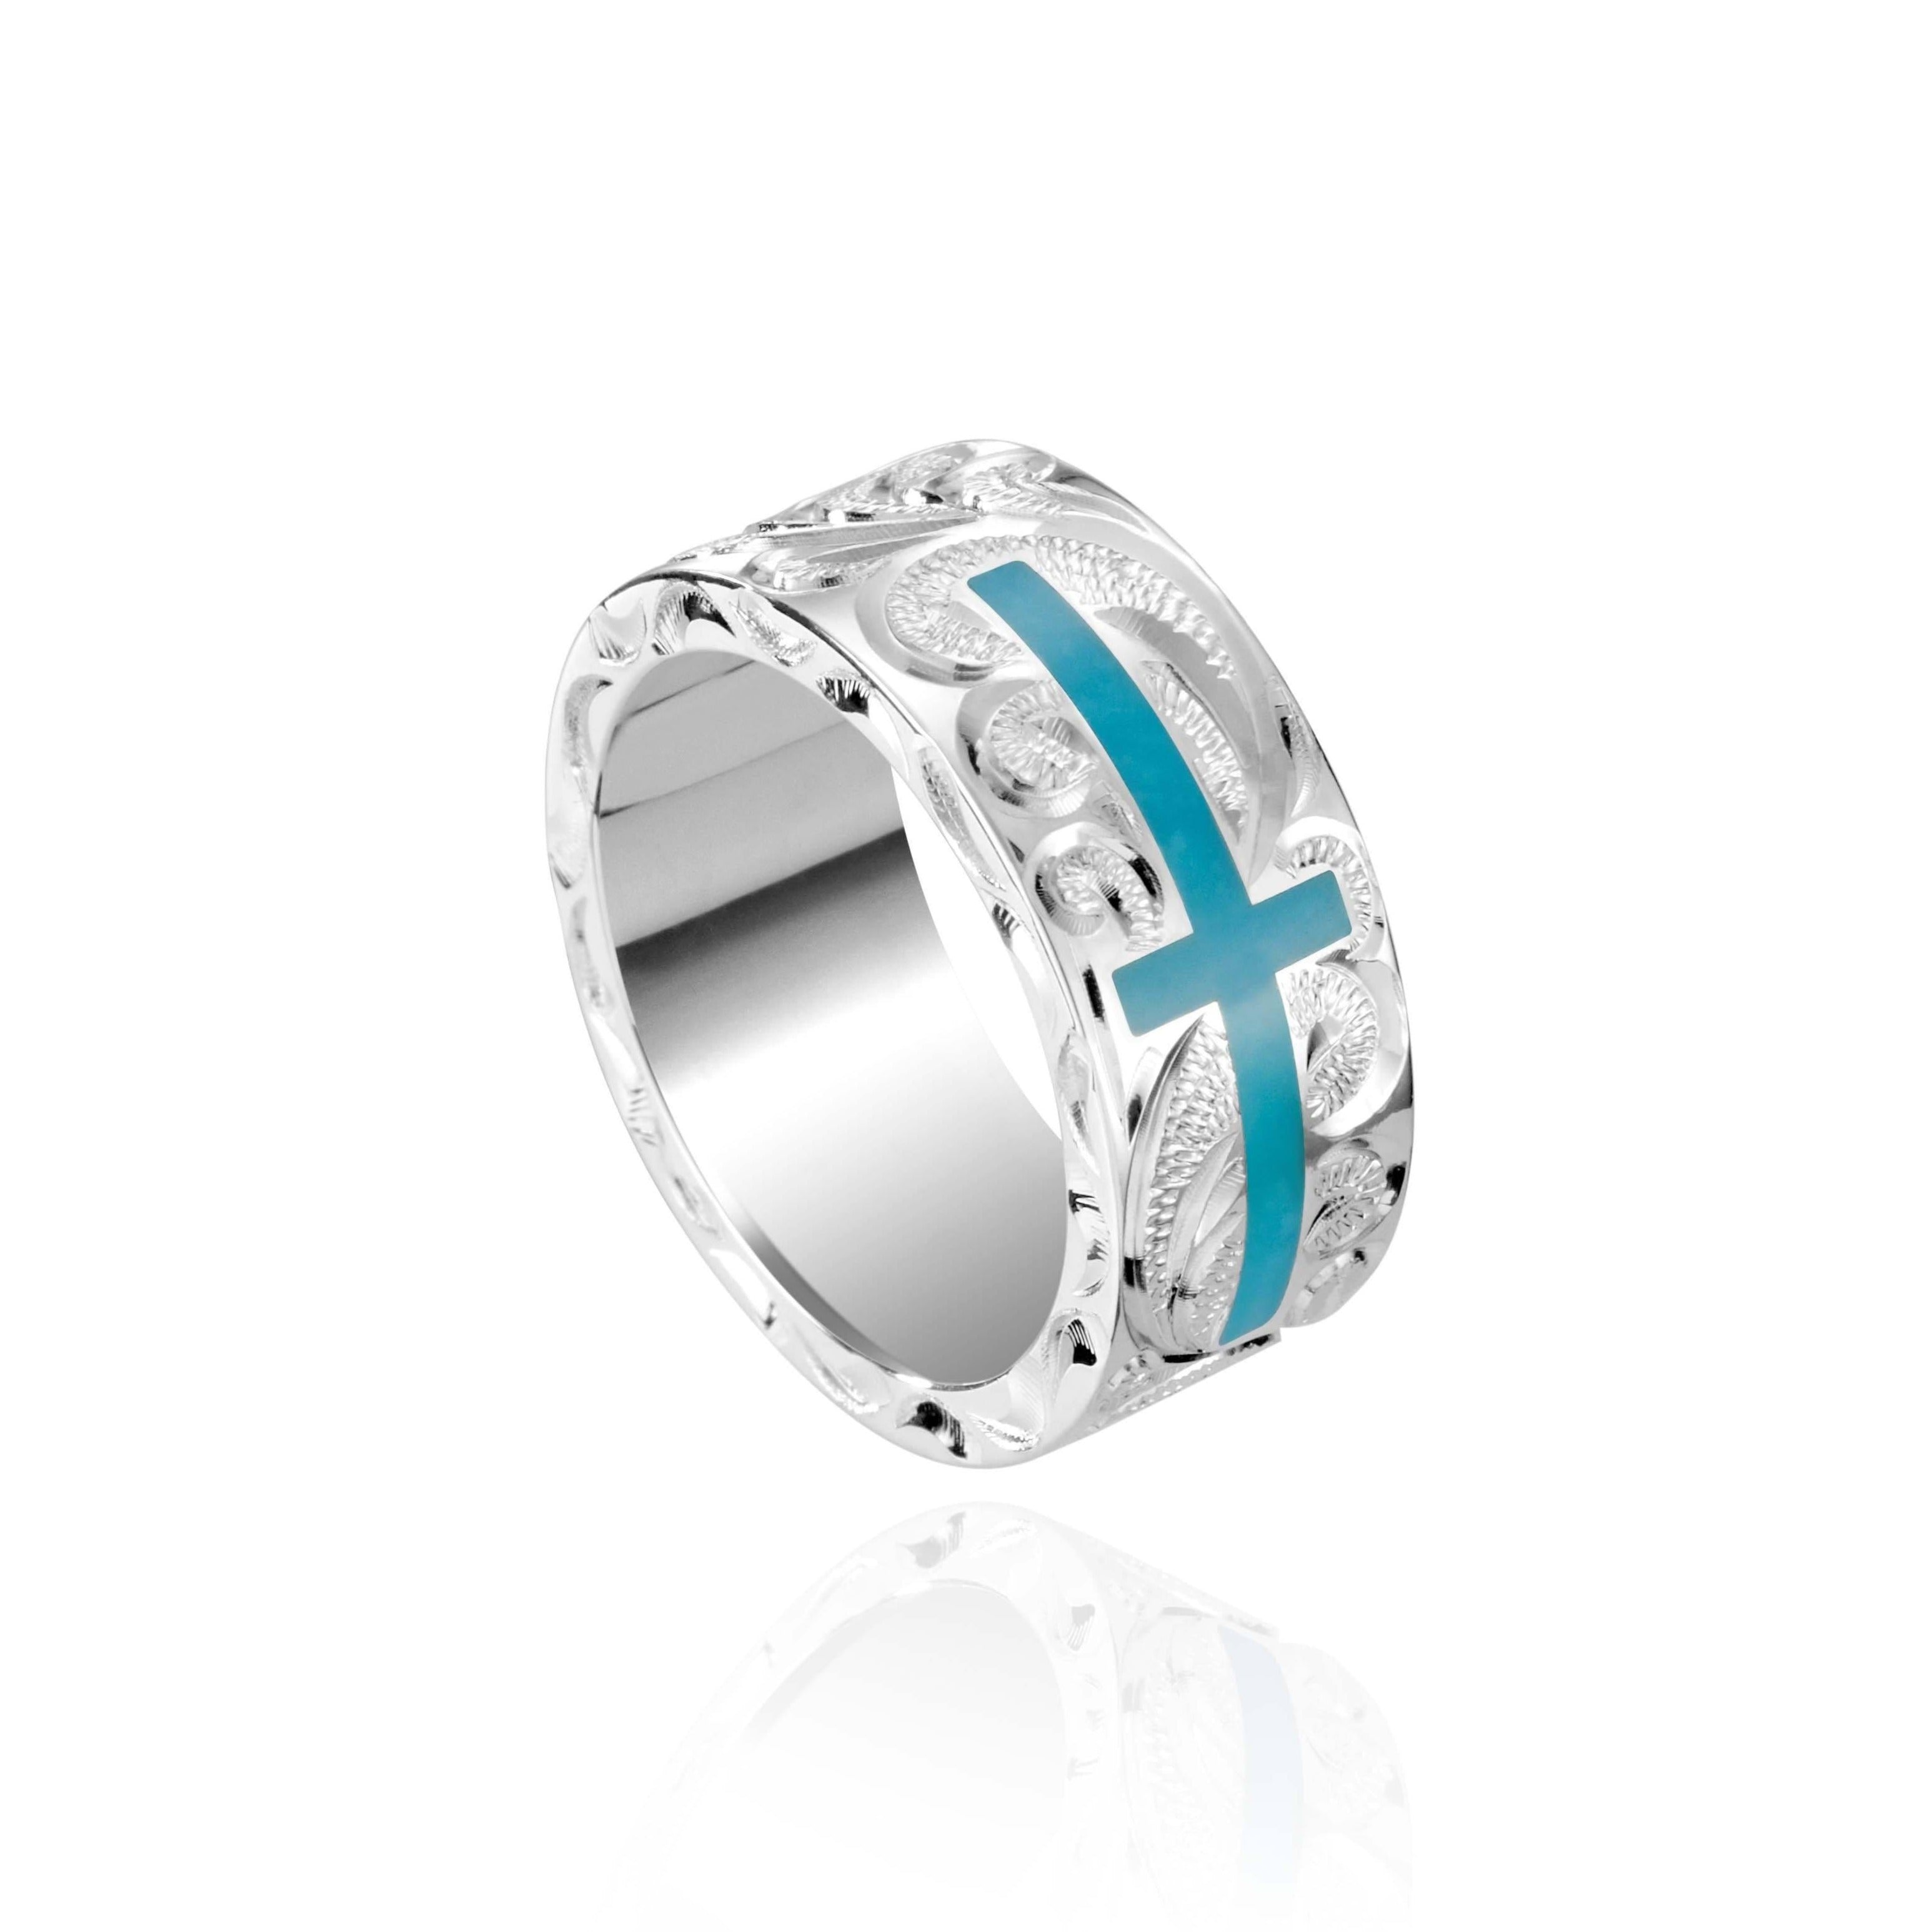 The picture shows a 925 sterling silver and turquoise cross ring with hand engravings.